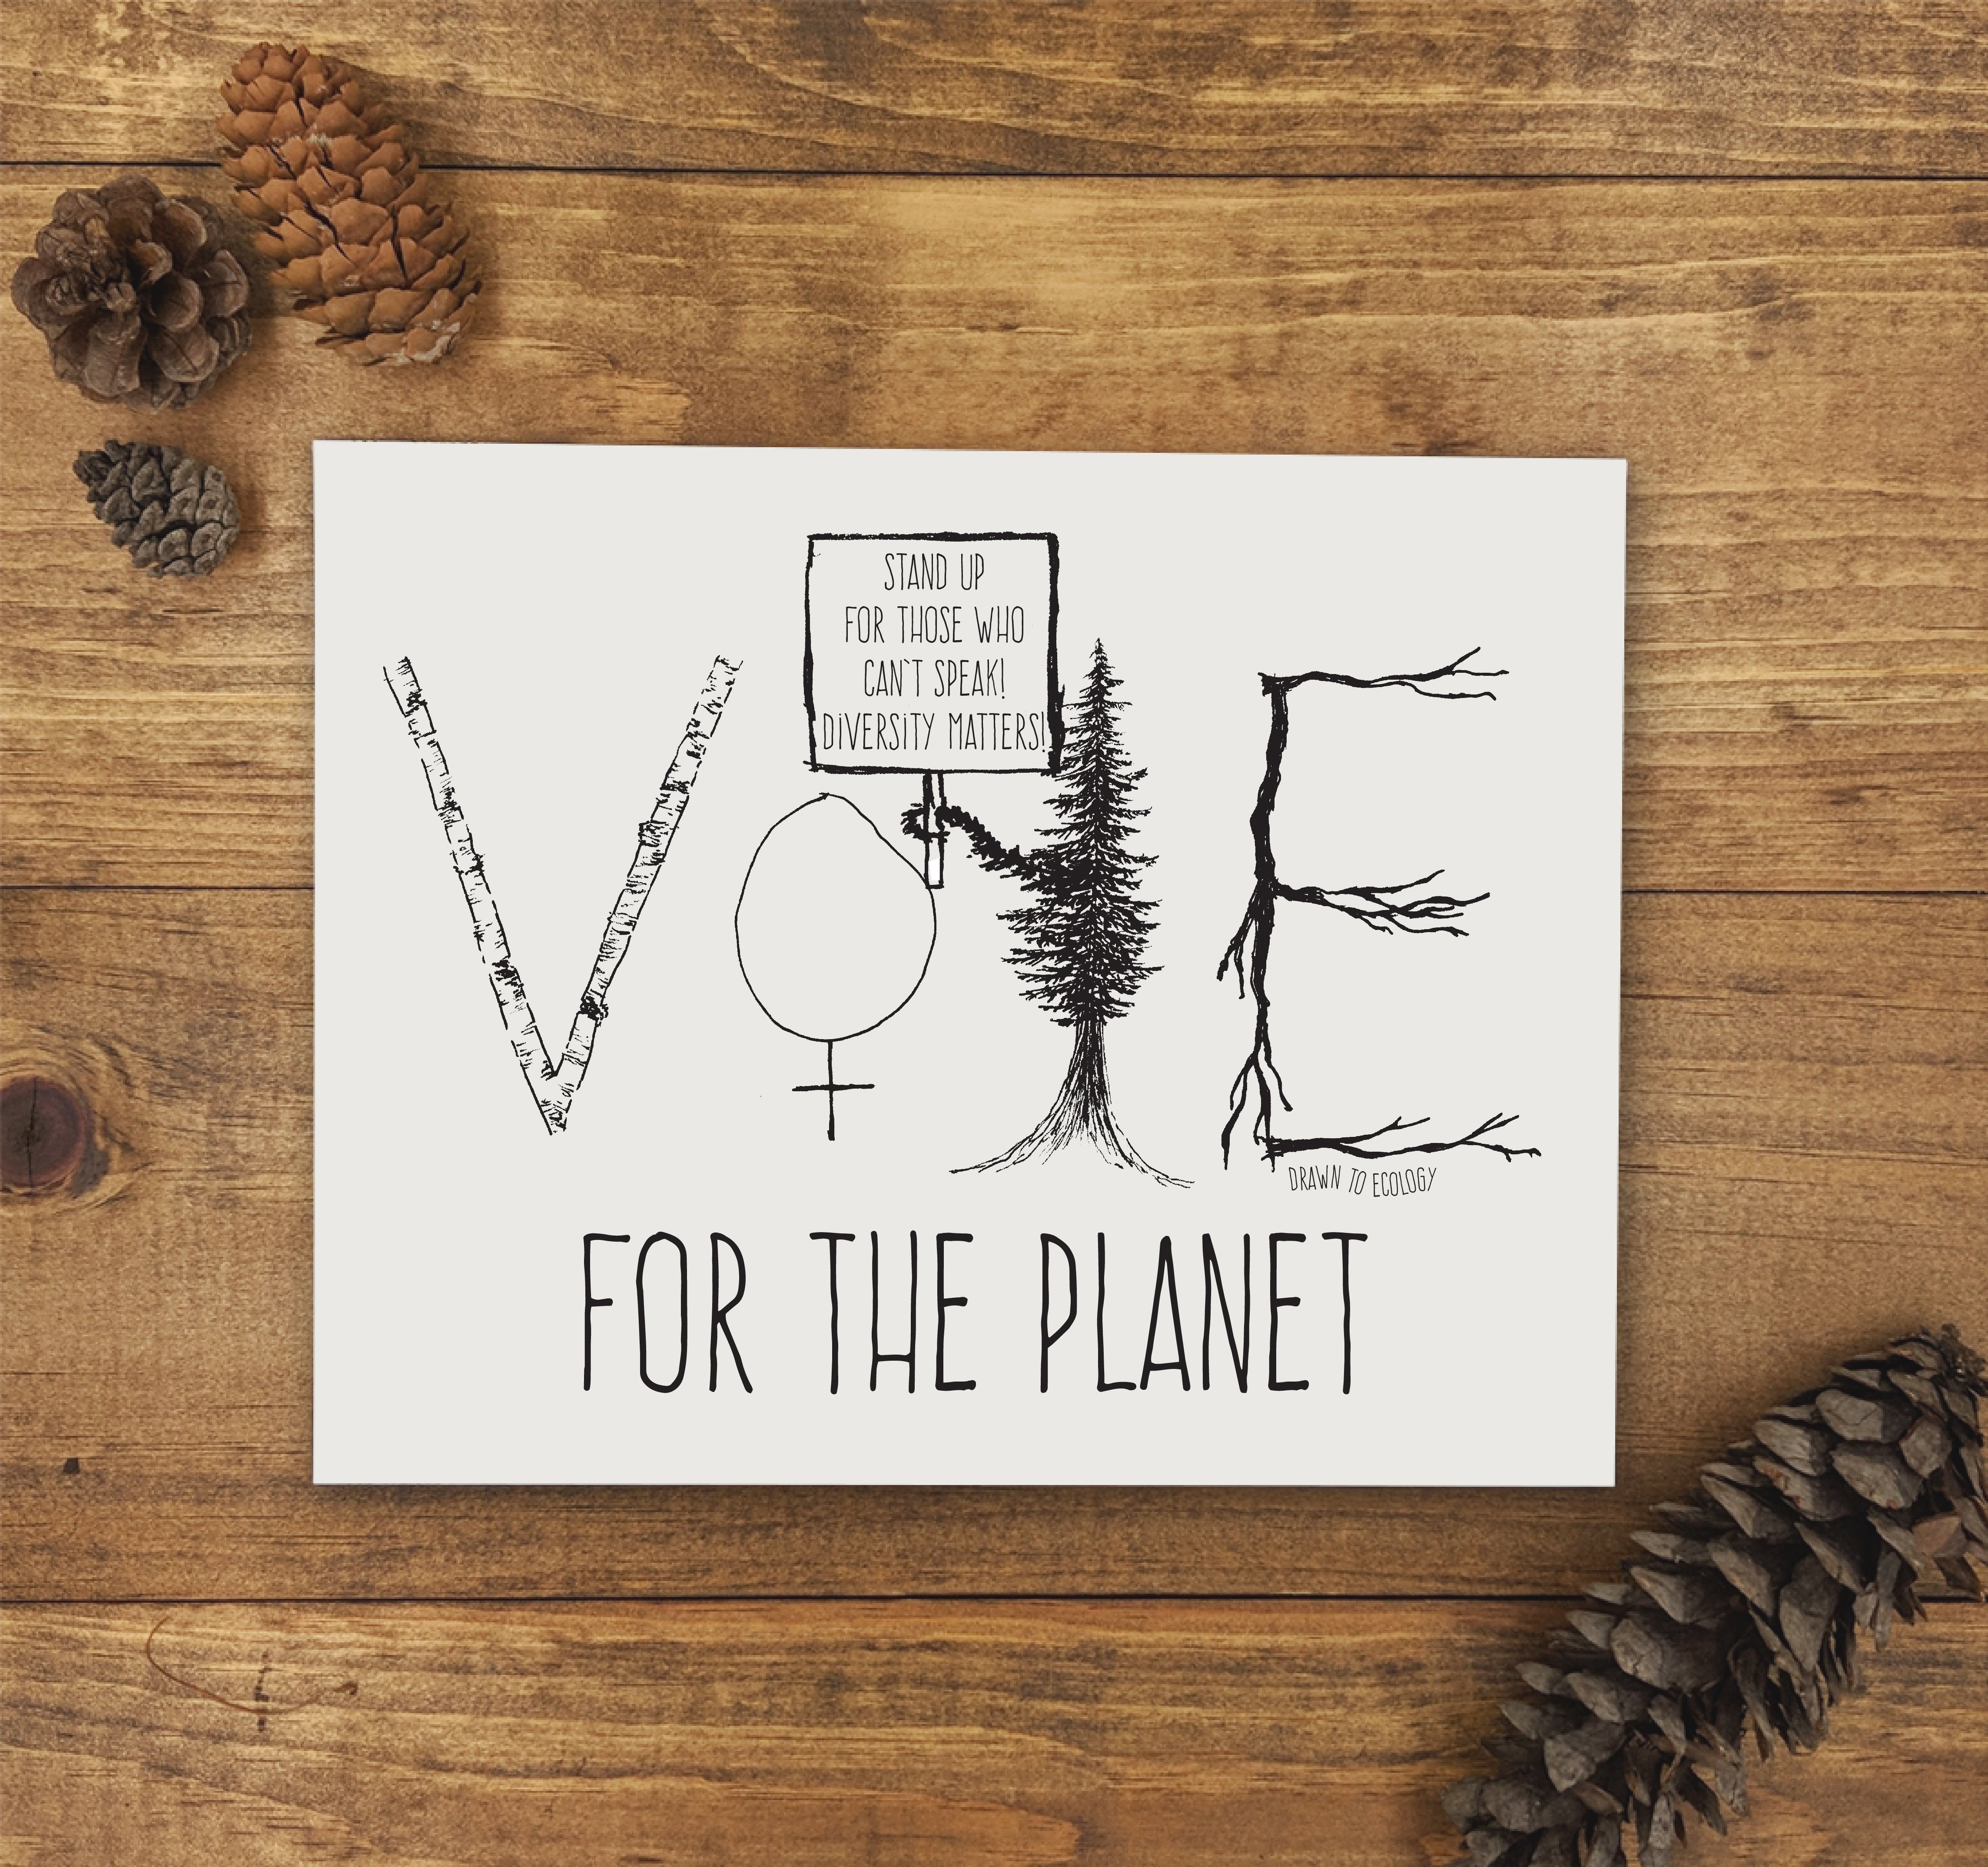 Vote for the Planet